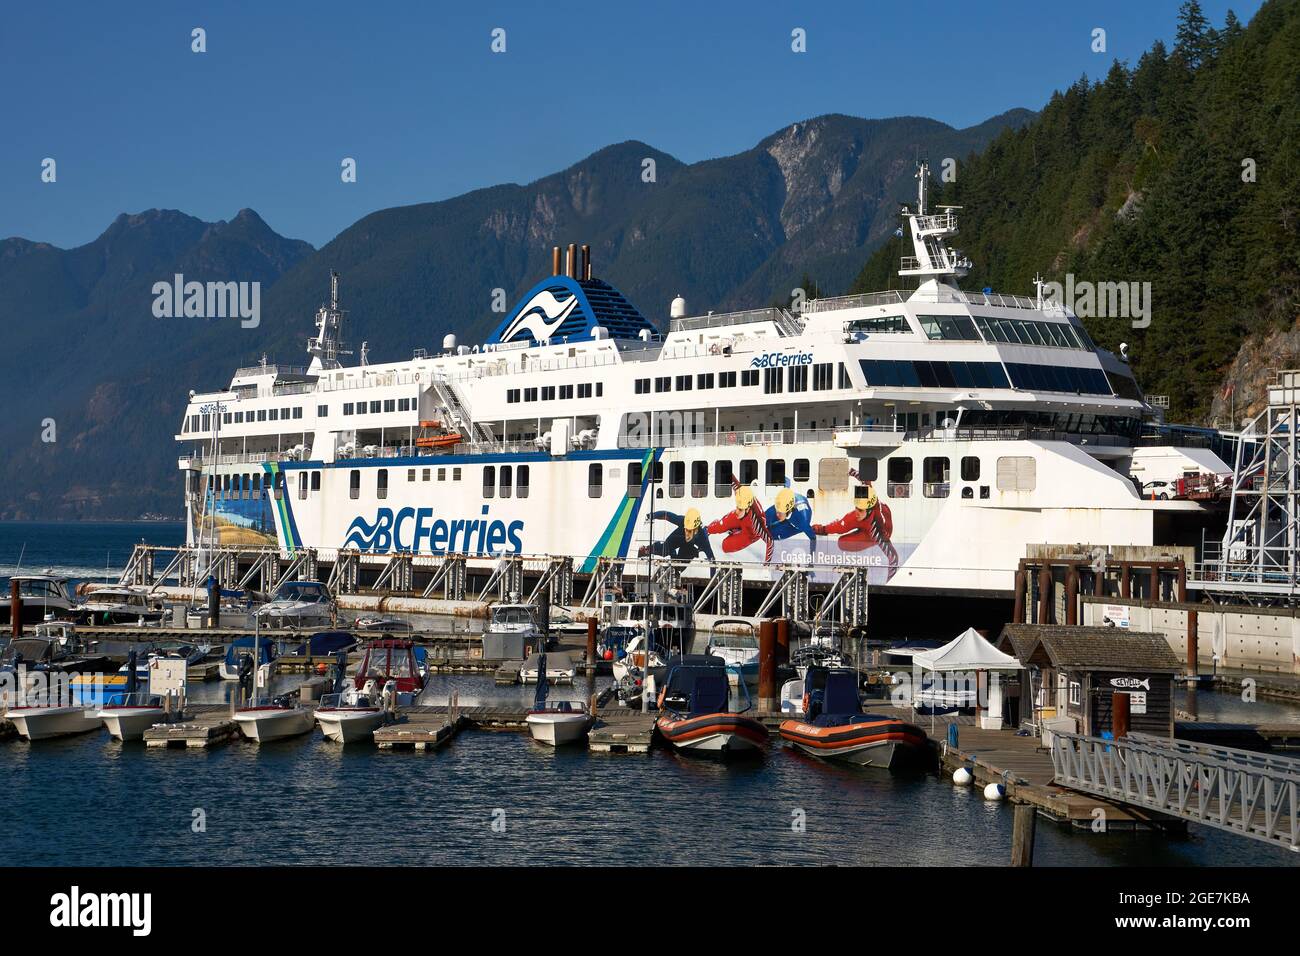 BC Ferries passenger and car ferry MV Coastal Renaissance docked at the Horseshoe Bay ferry terminal, West Vancouver, British Columbia, Canada Stock Photo